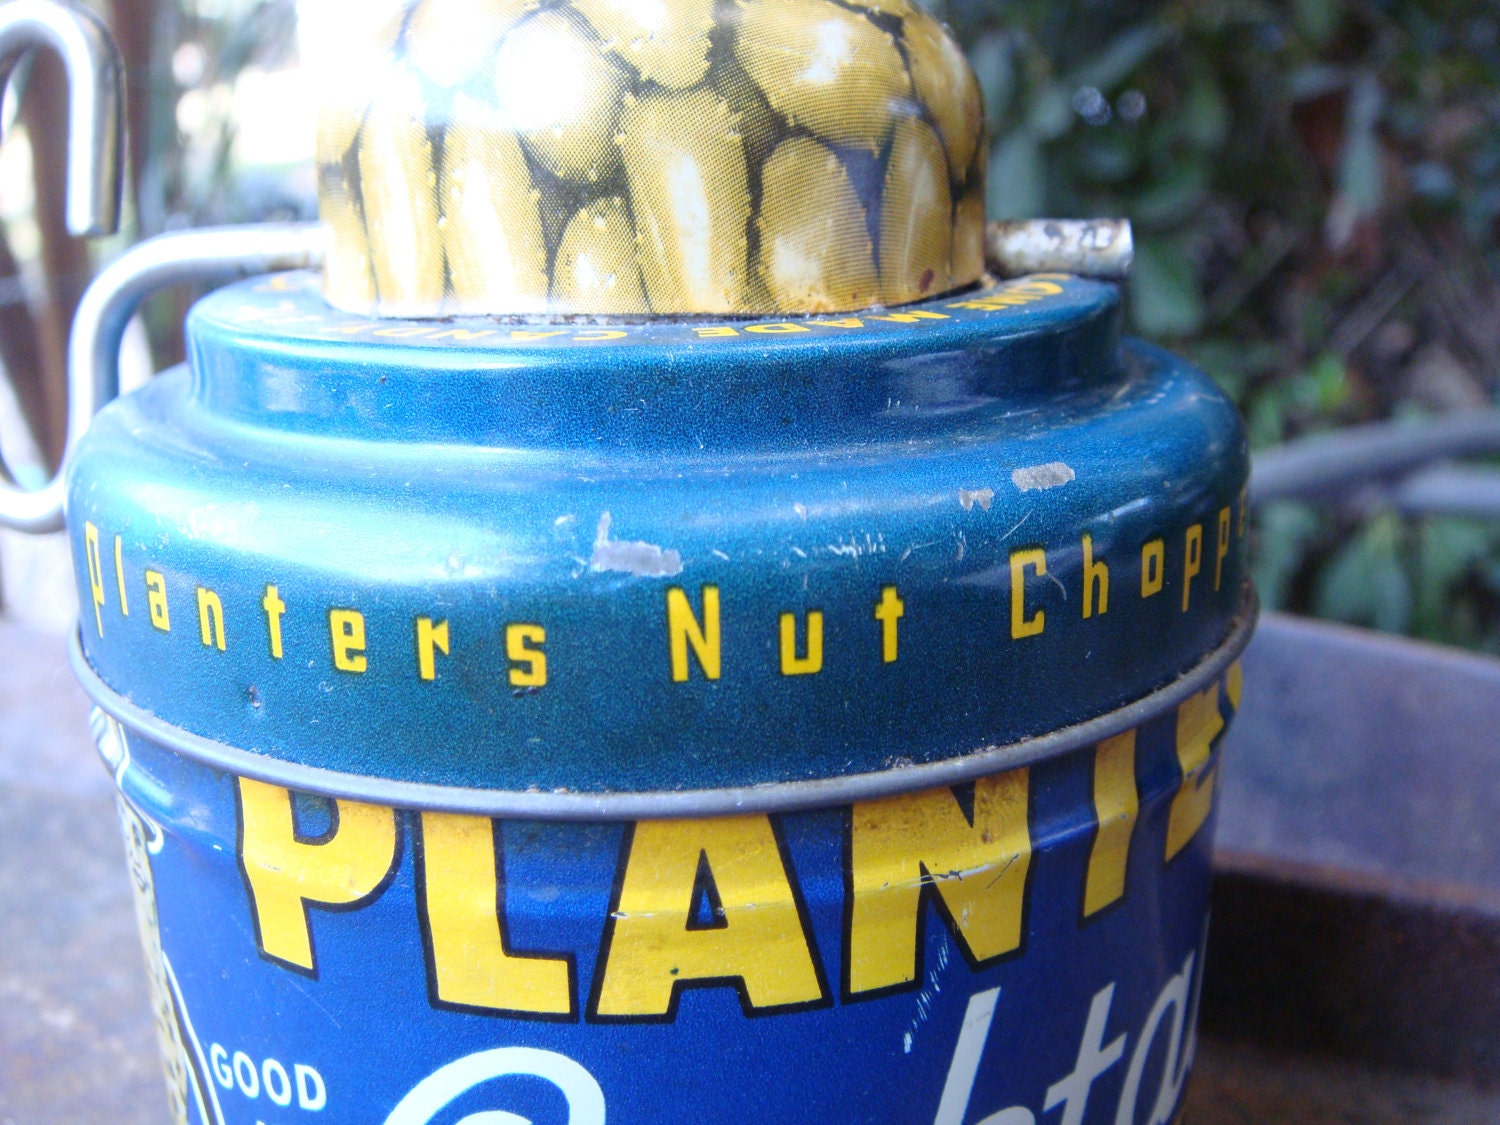 Vintage Mr Peanut Planters Cocktail Peanut Can With Attached1500 x 1125